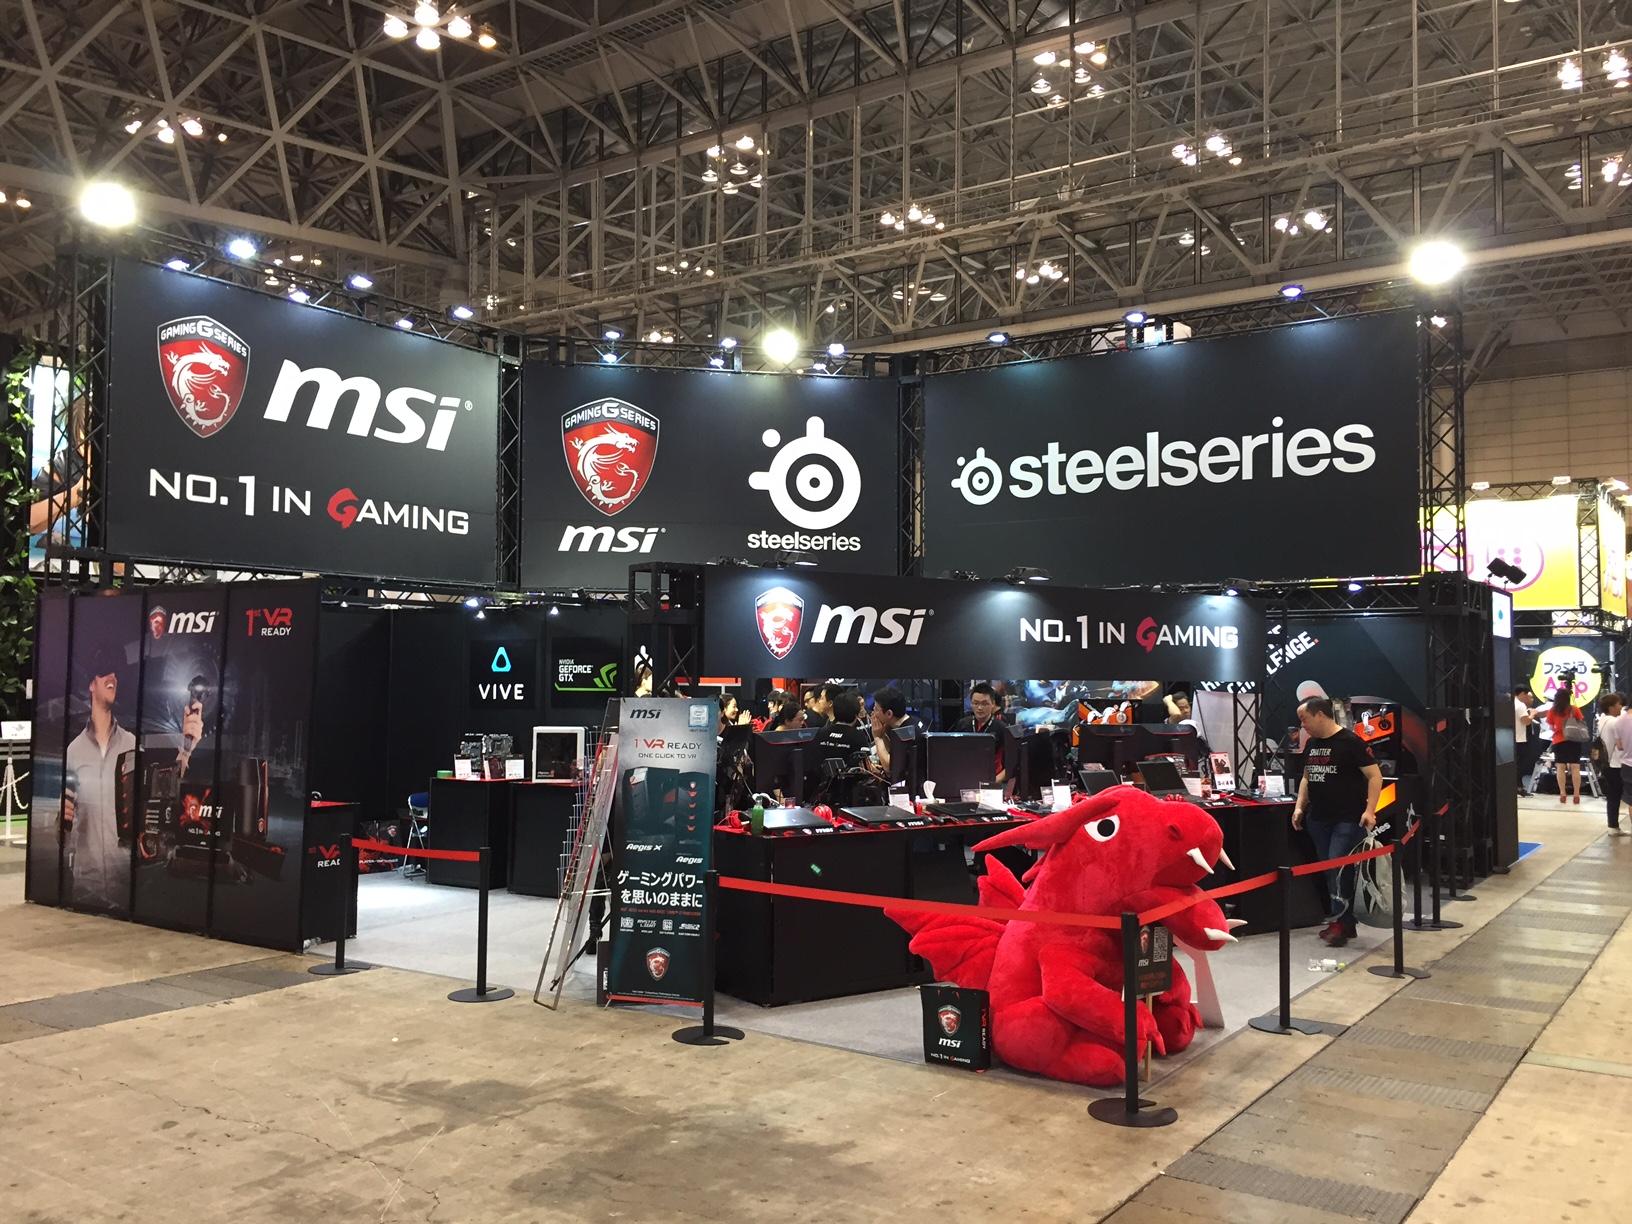 TOKYO GAME SHOW 2016　msi / SteelSeries Booth